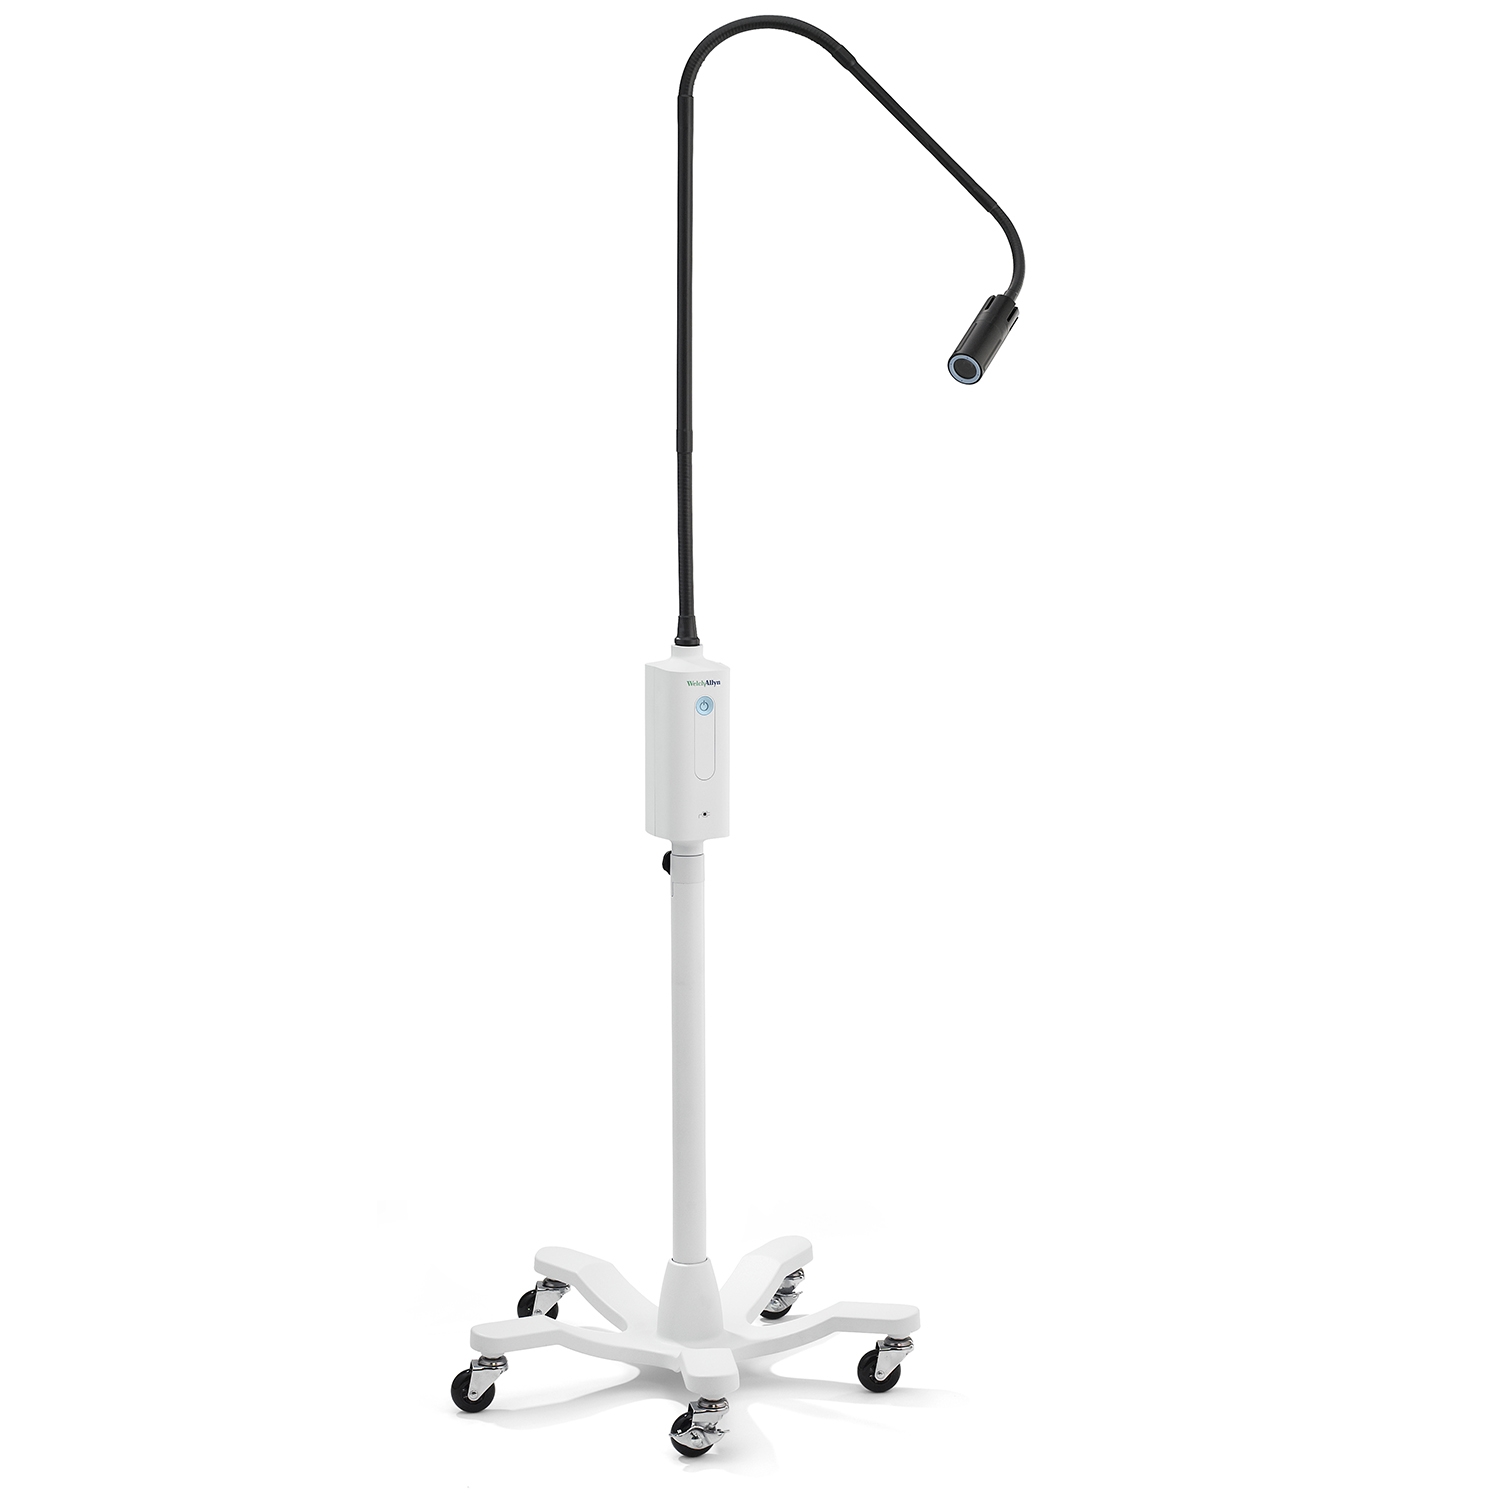 Welch Allyn lampe d'examen GS IV LED + pied roulant